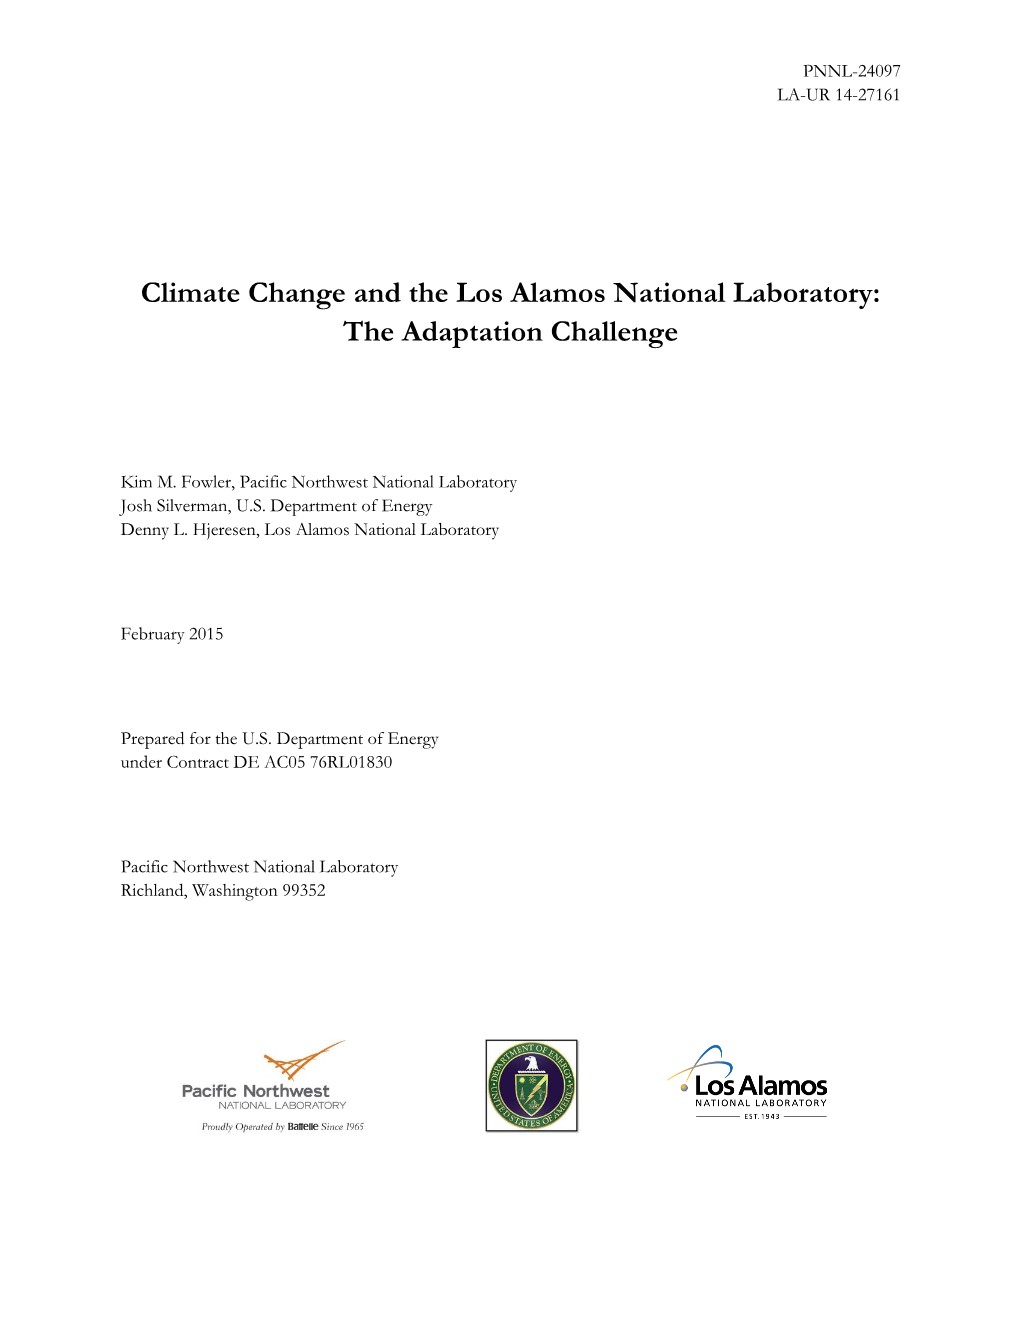 Climate Change and the Los Alamos National Laboratory: the Adaptation Challenge